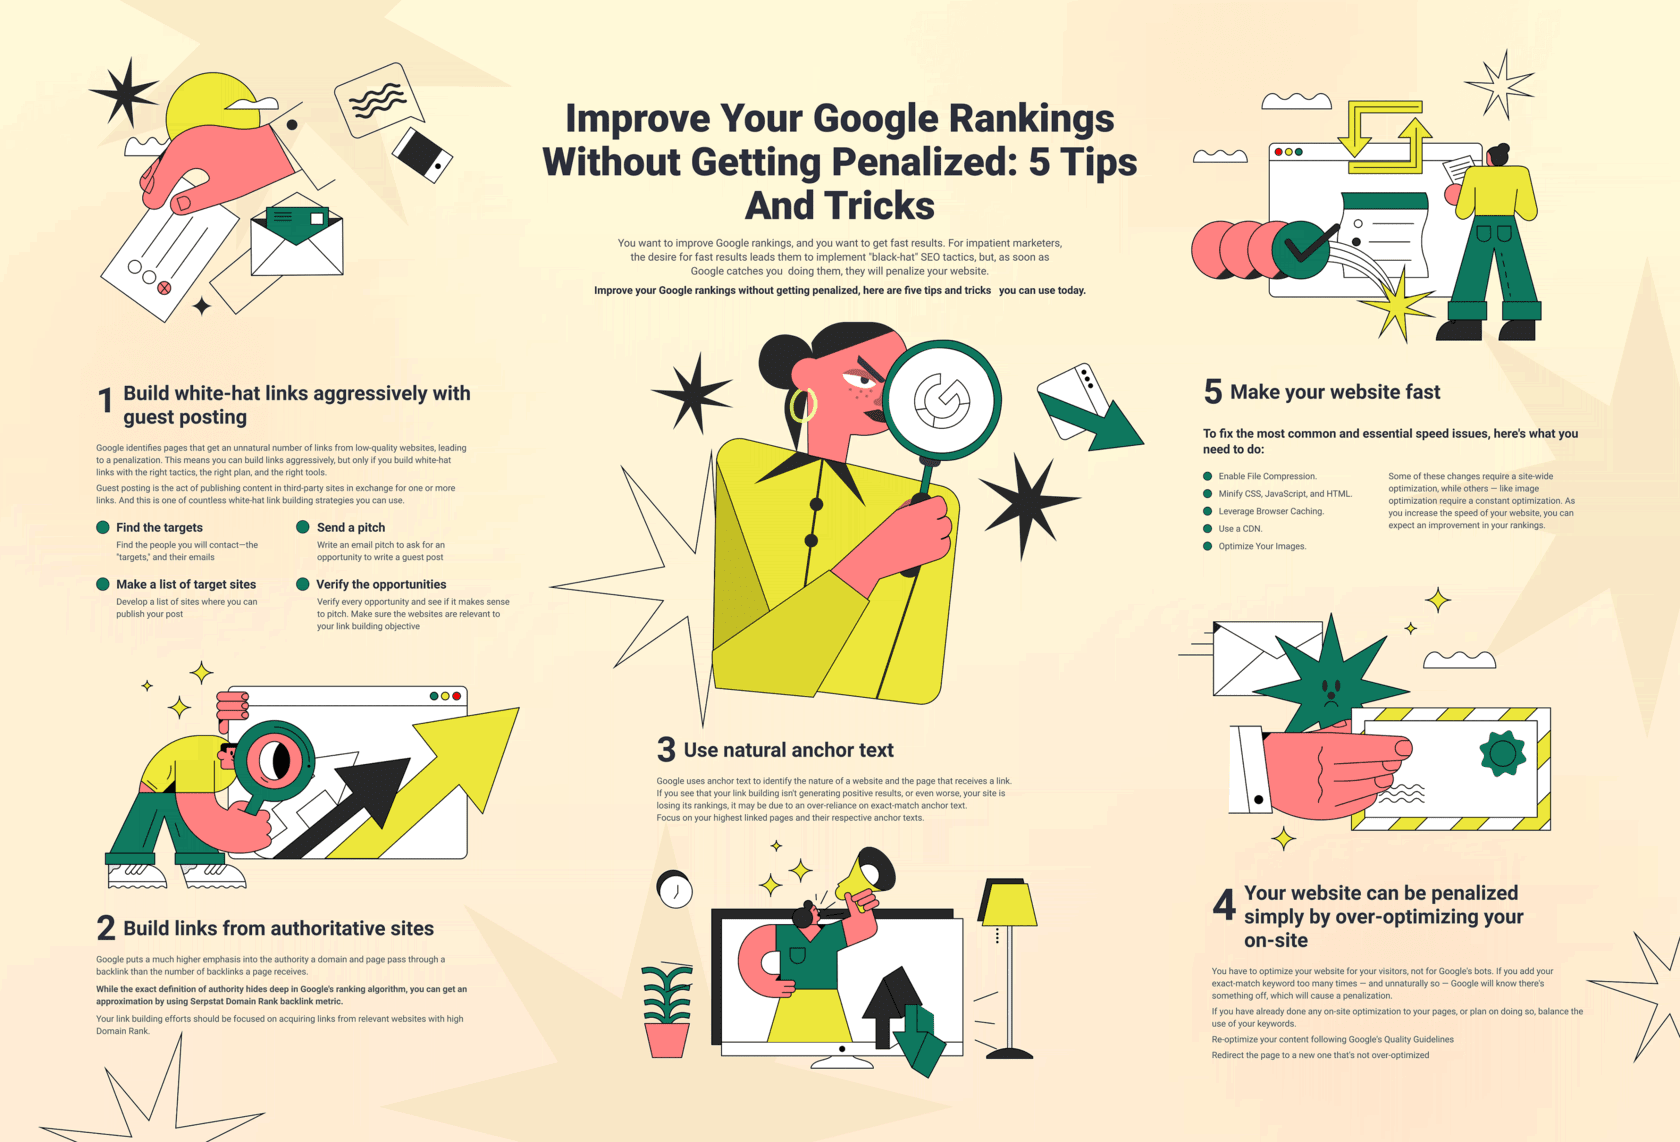 How To Improve Your Google Rankings Without Getting Penalized: 5 Tips And Tricks + Infographic 16261788065786